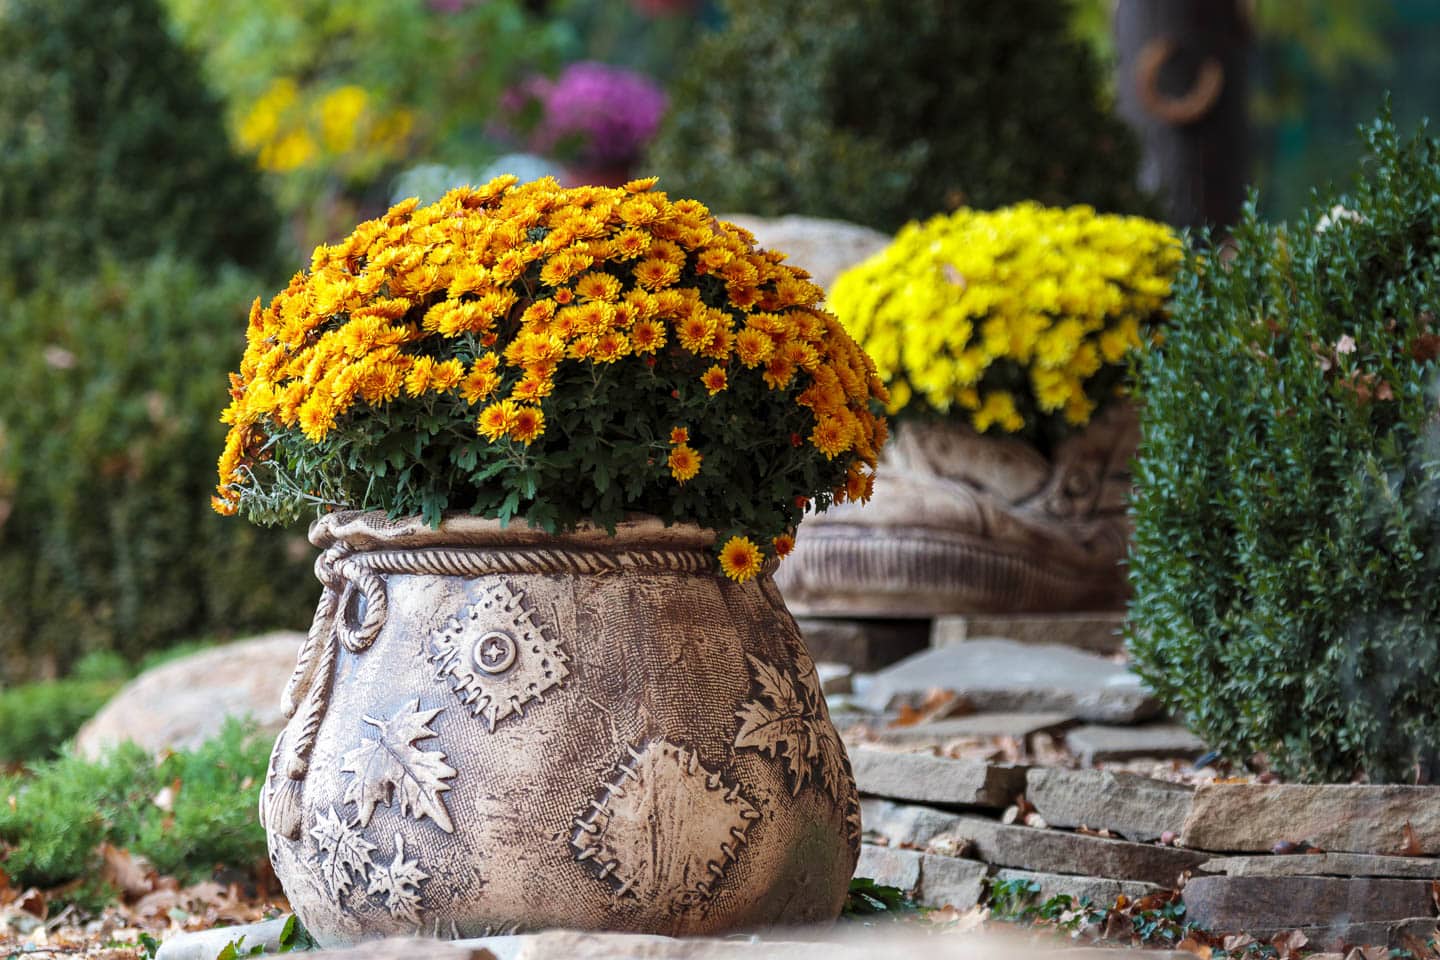 Large pot of orange mums in front of a pot of yellow mums